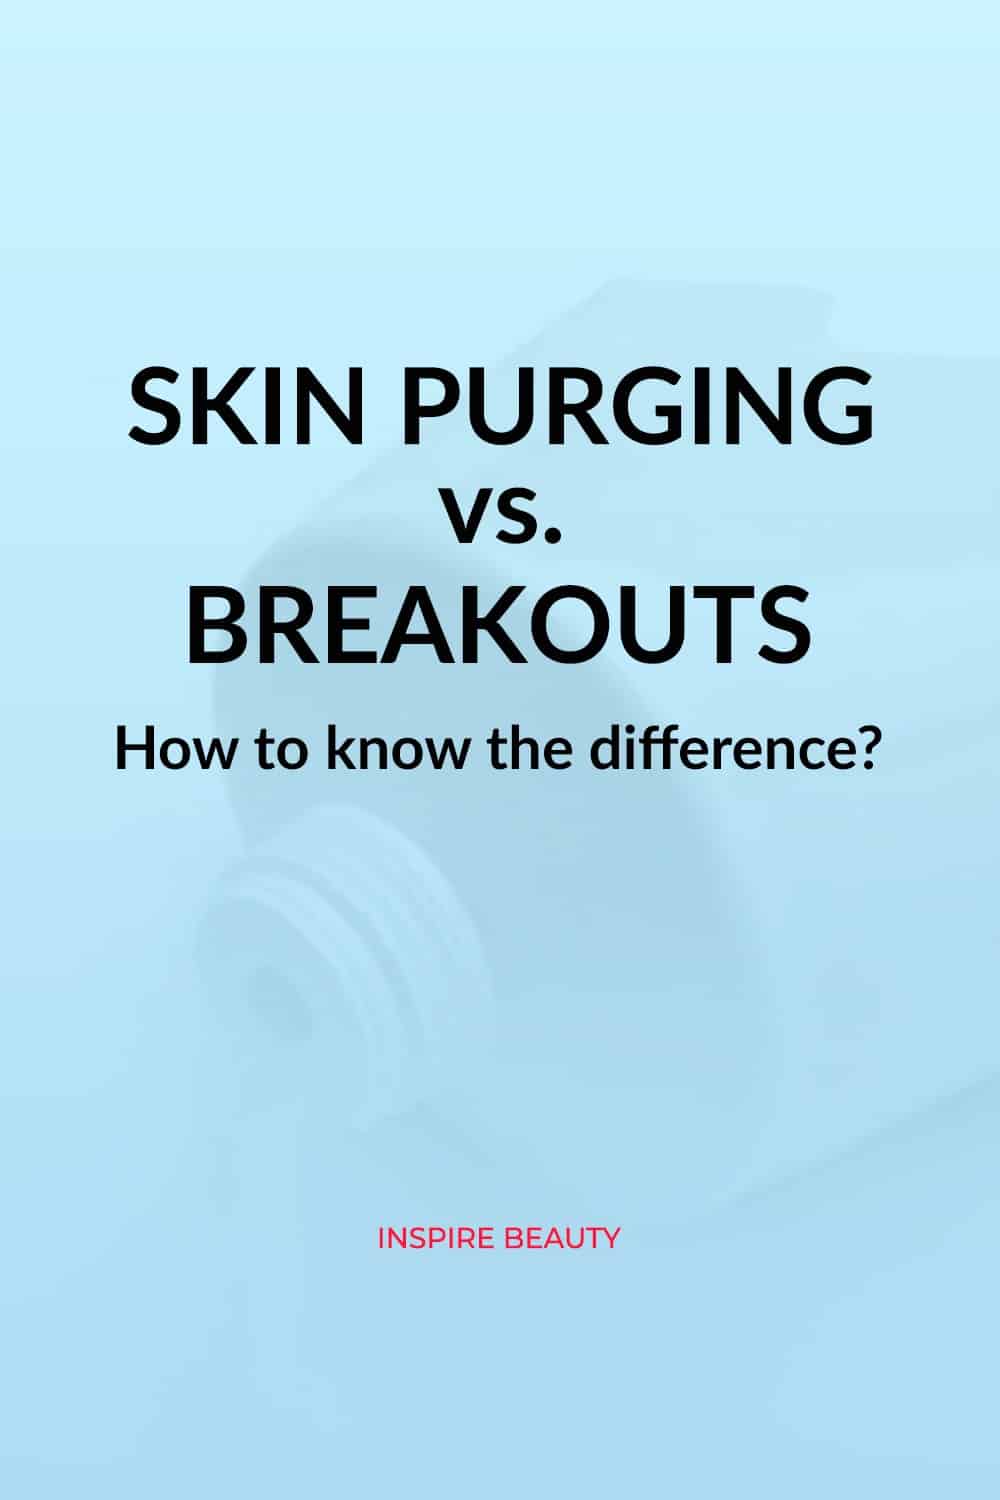 Find out the difference between skin purging and breakout.